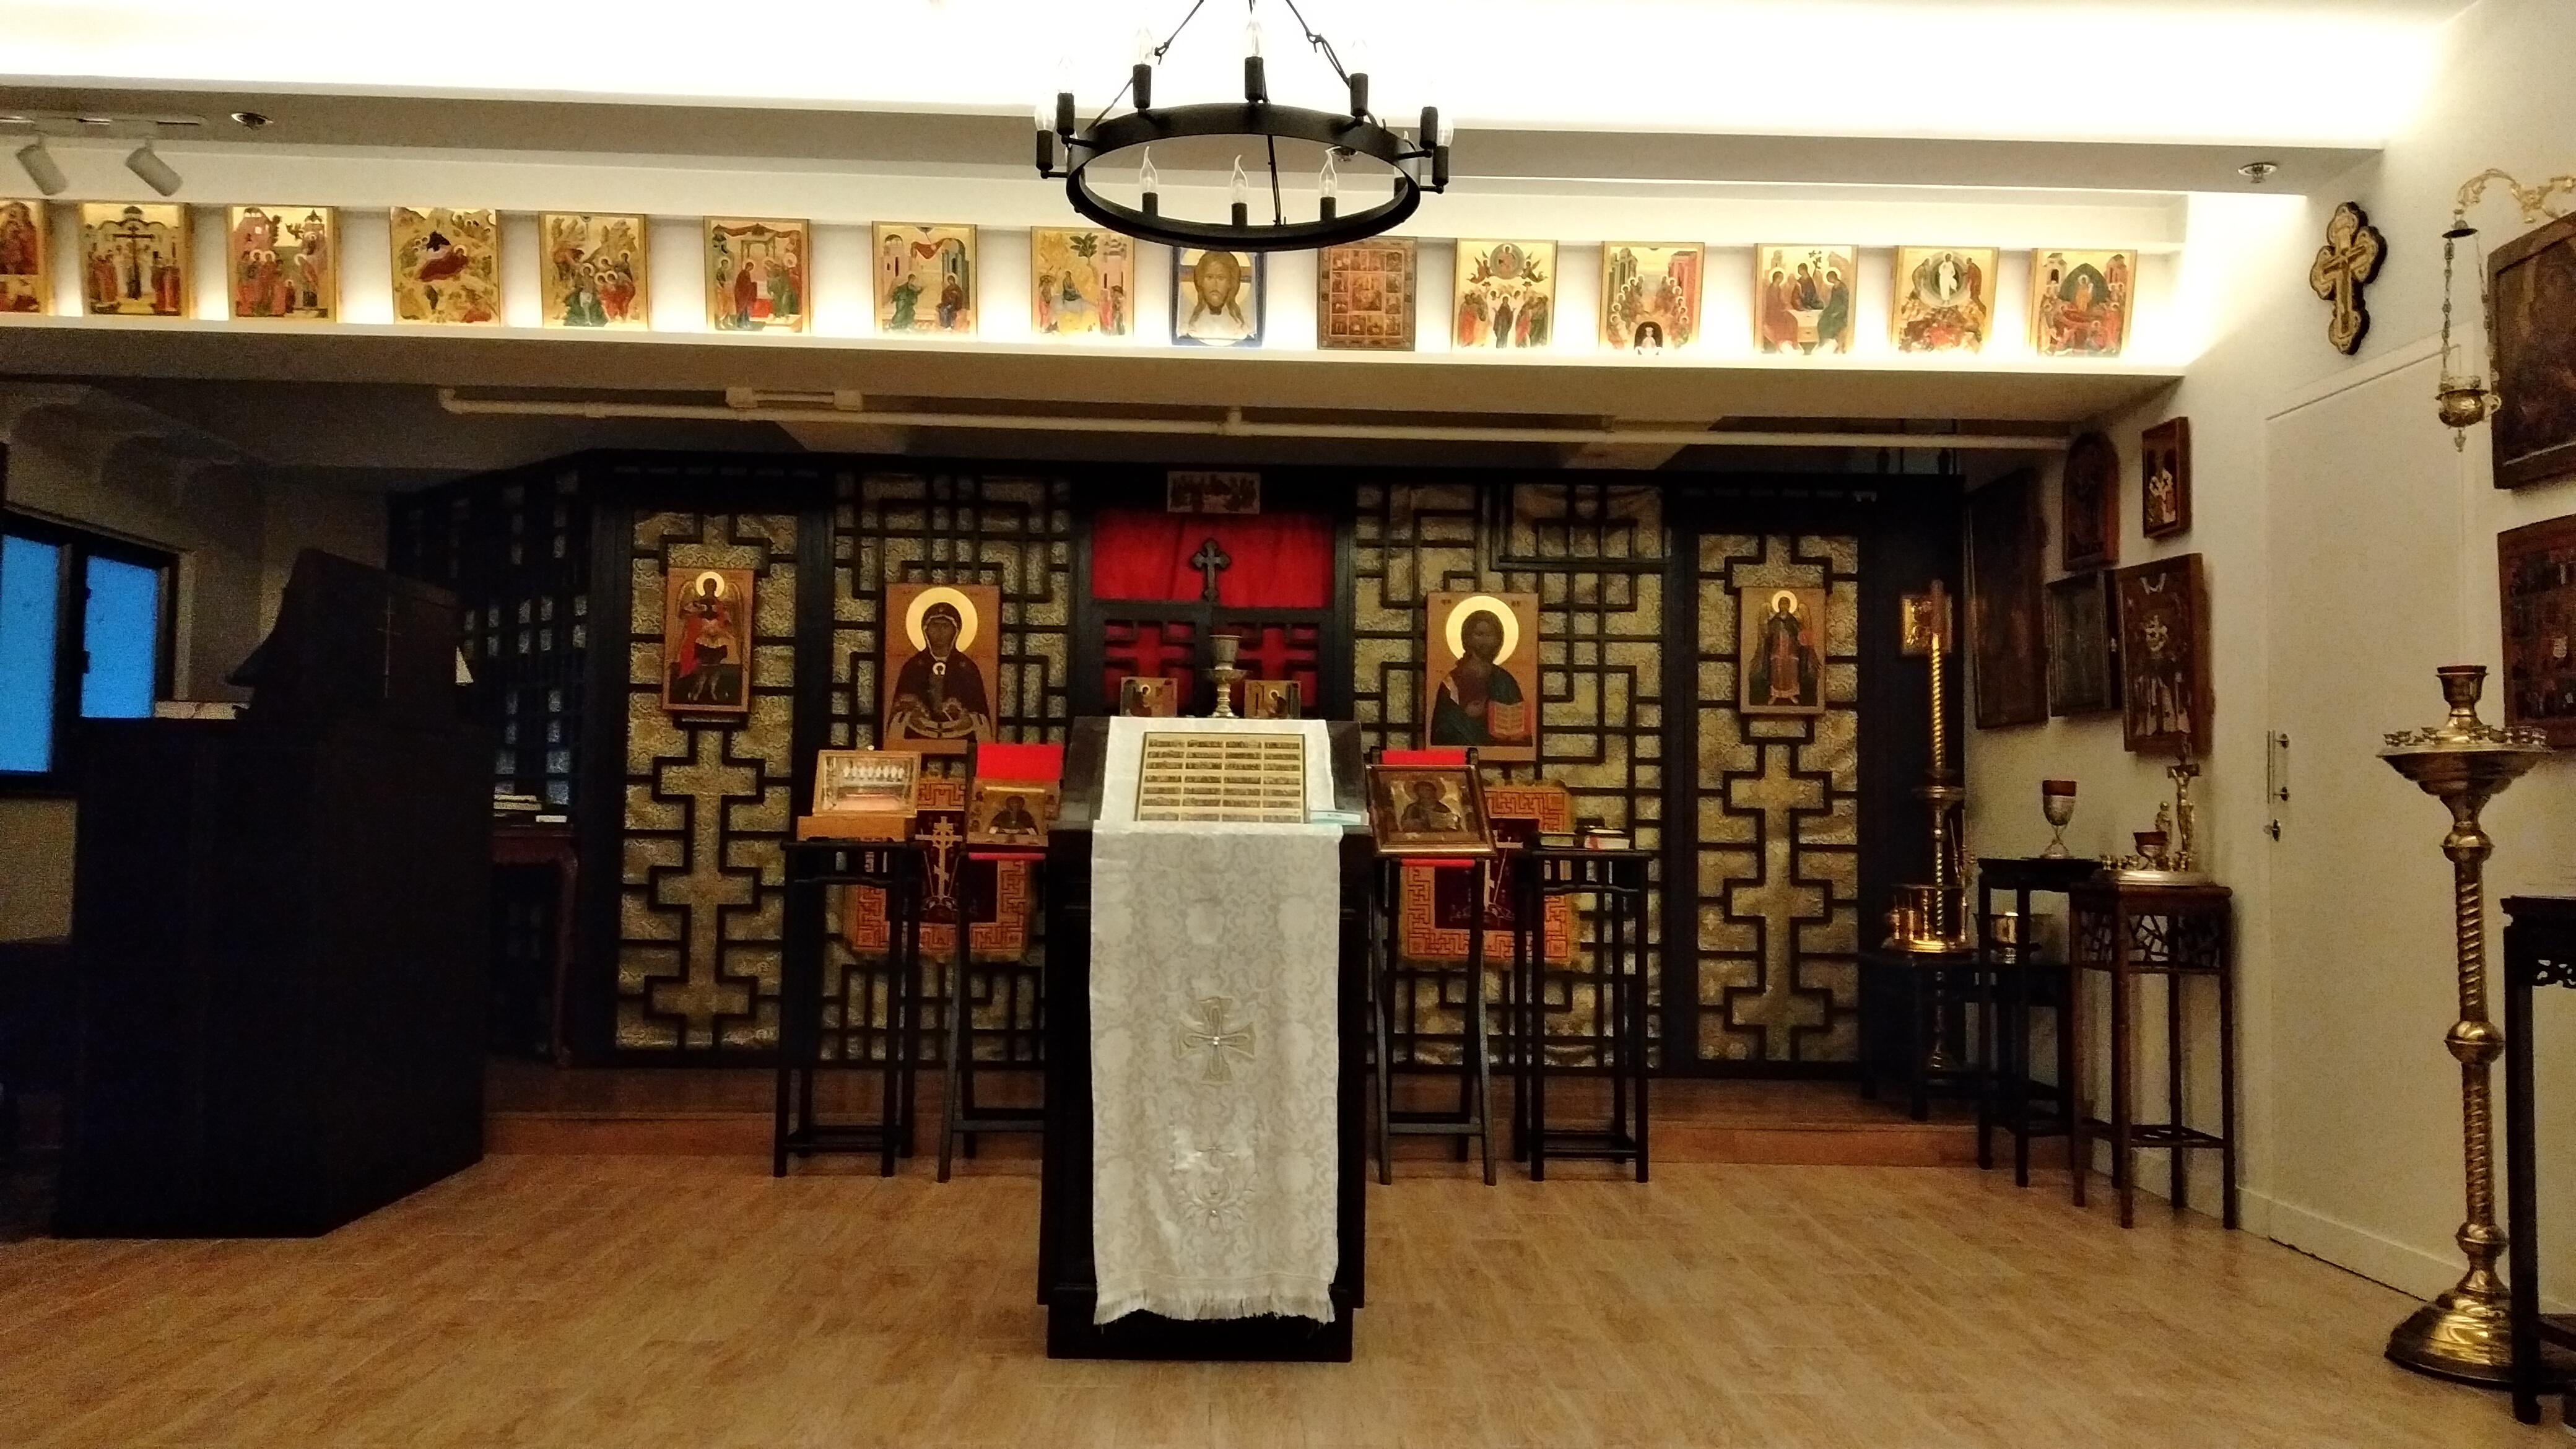 The Saints Peter and Paul Orthodox Church in Hong Kong